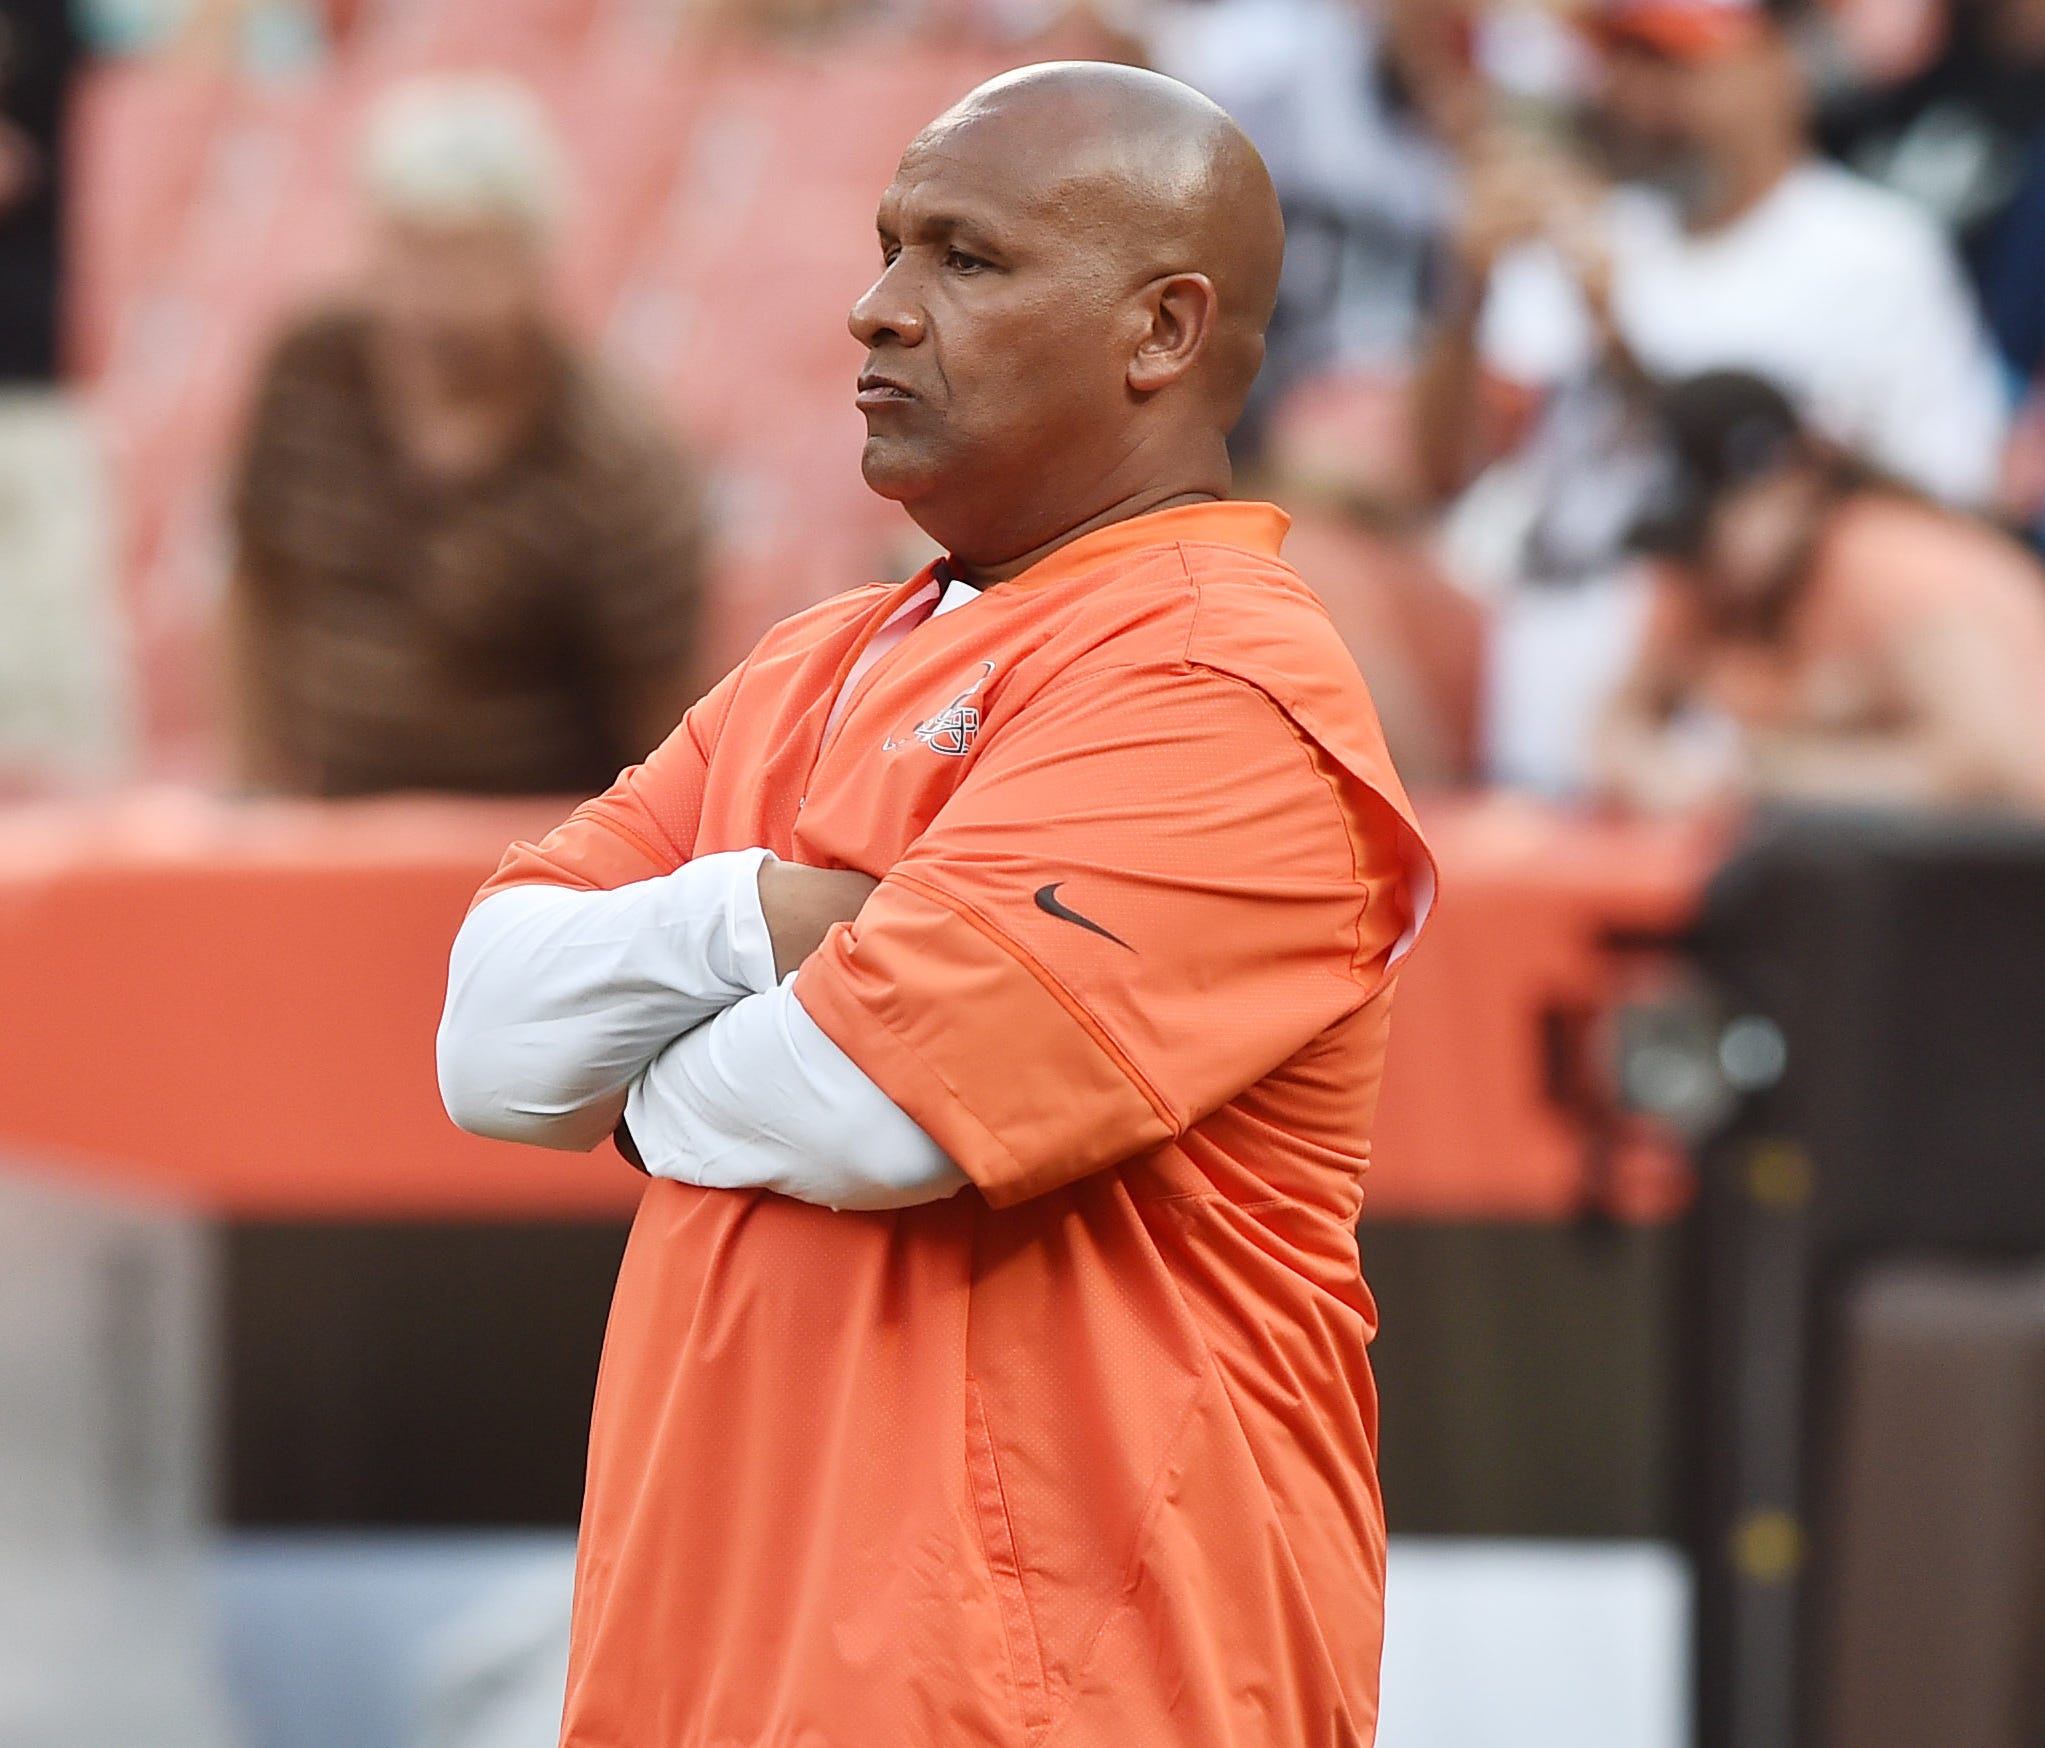 Browns coach Hue Jackson isn't a fan of players protesting during the national anthem.